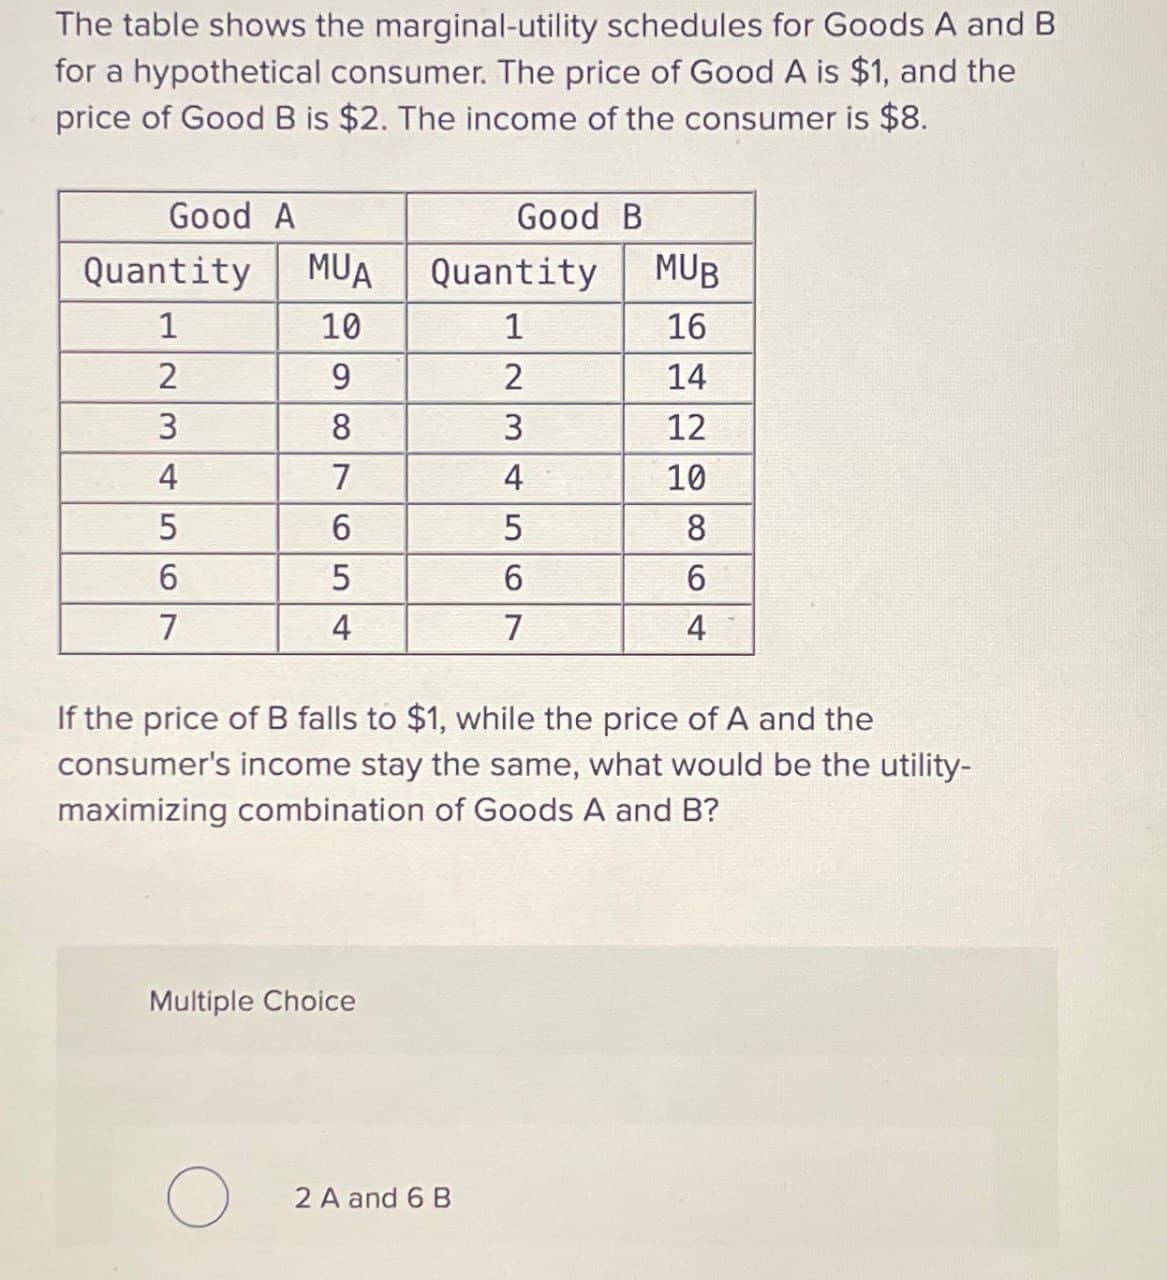 The table shows the marginal-utility schedules for Goods A and B
for a hypothetical consumer. The price of Good A is $1, and the
price of Good B is $2. The income of the consumer is $8.
Good A
Good B
Quantity MUA Quantity
MUB
1
10
1
16
2
9
2
14
3
8
3
12
4
7
4
10
5
6
5
8
6
5
6
6
7
4
7
4
If the price of B falls to $1, while the price of A and the
consumer's income stay the same, what would be the utility-
maximizing combination of Goods A and B?
Multiple Choice
О
2 A and 6 B